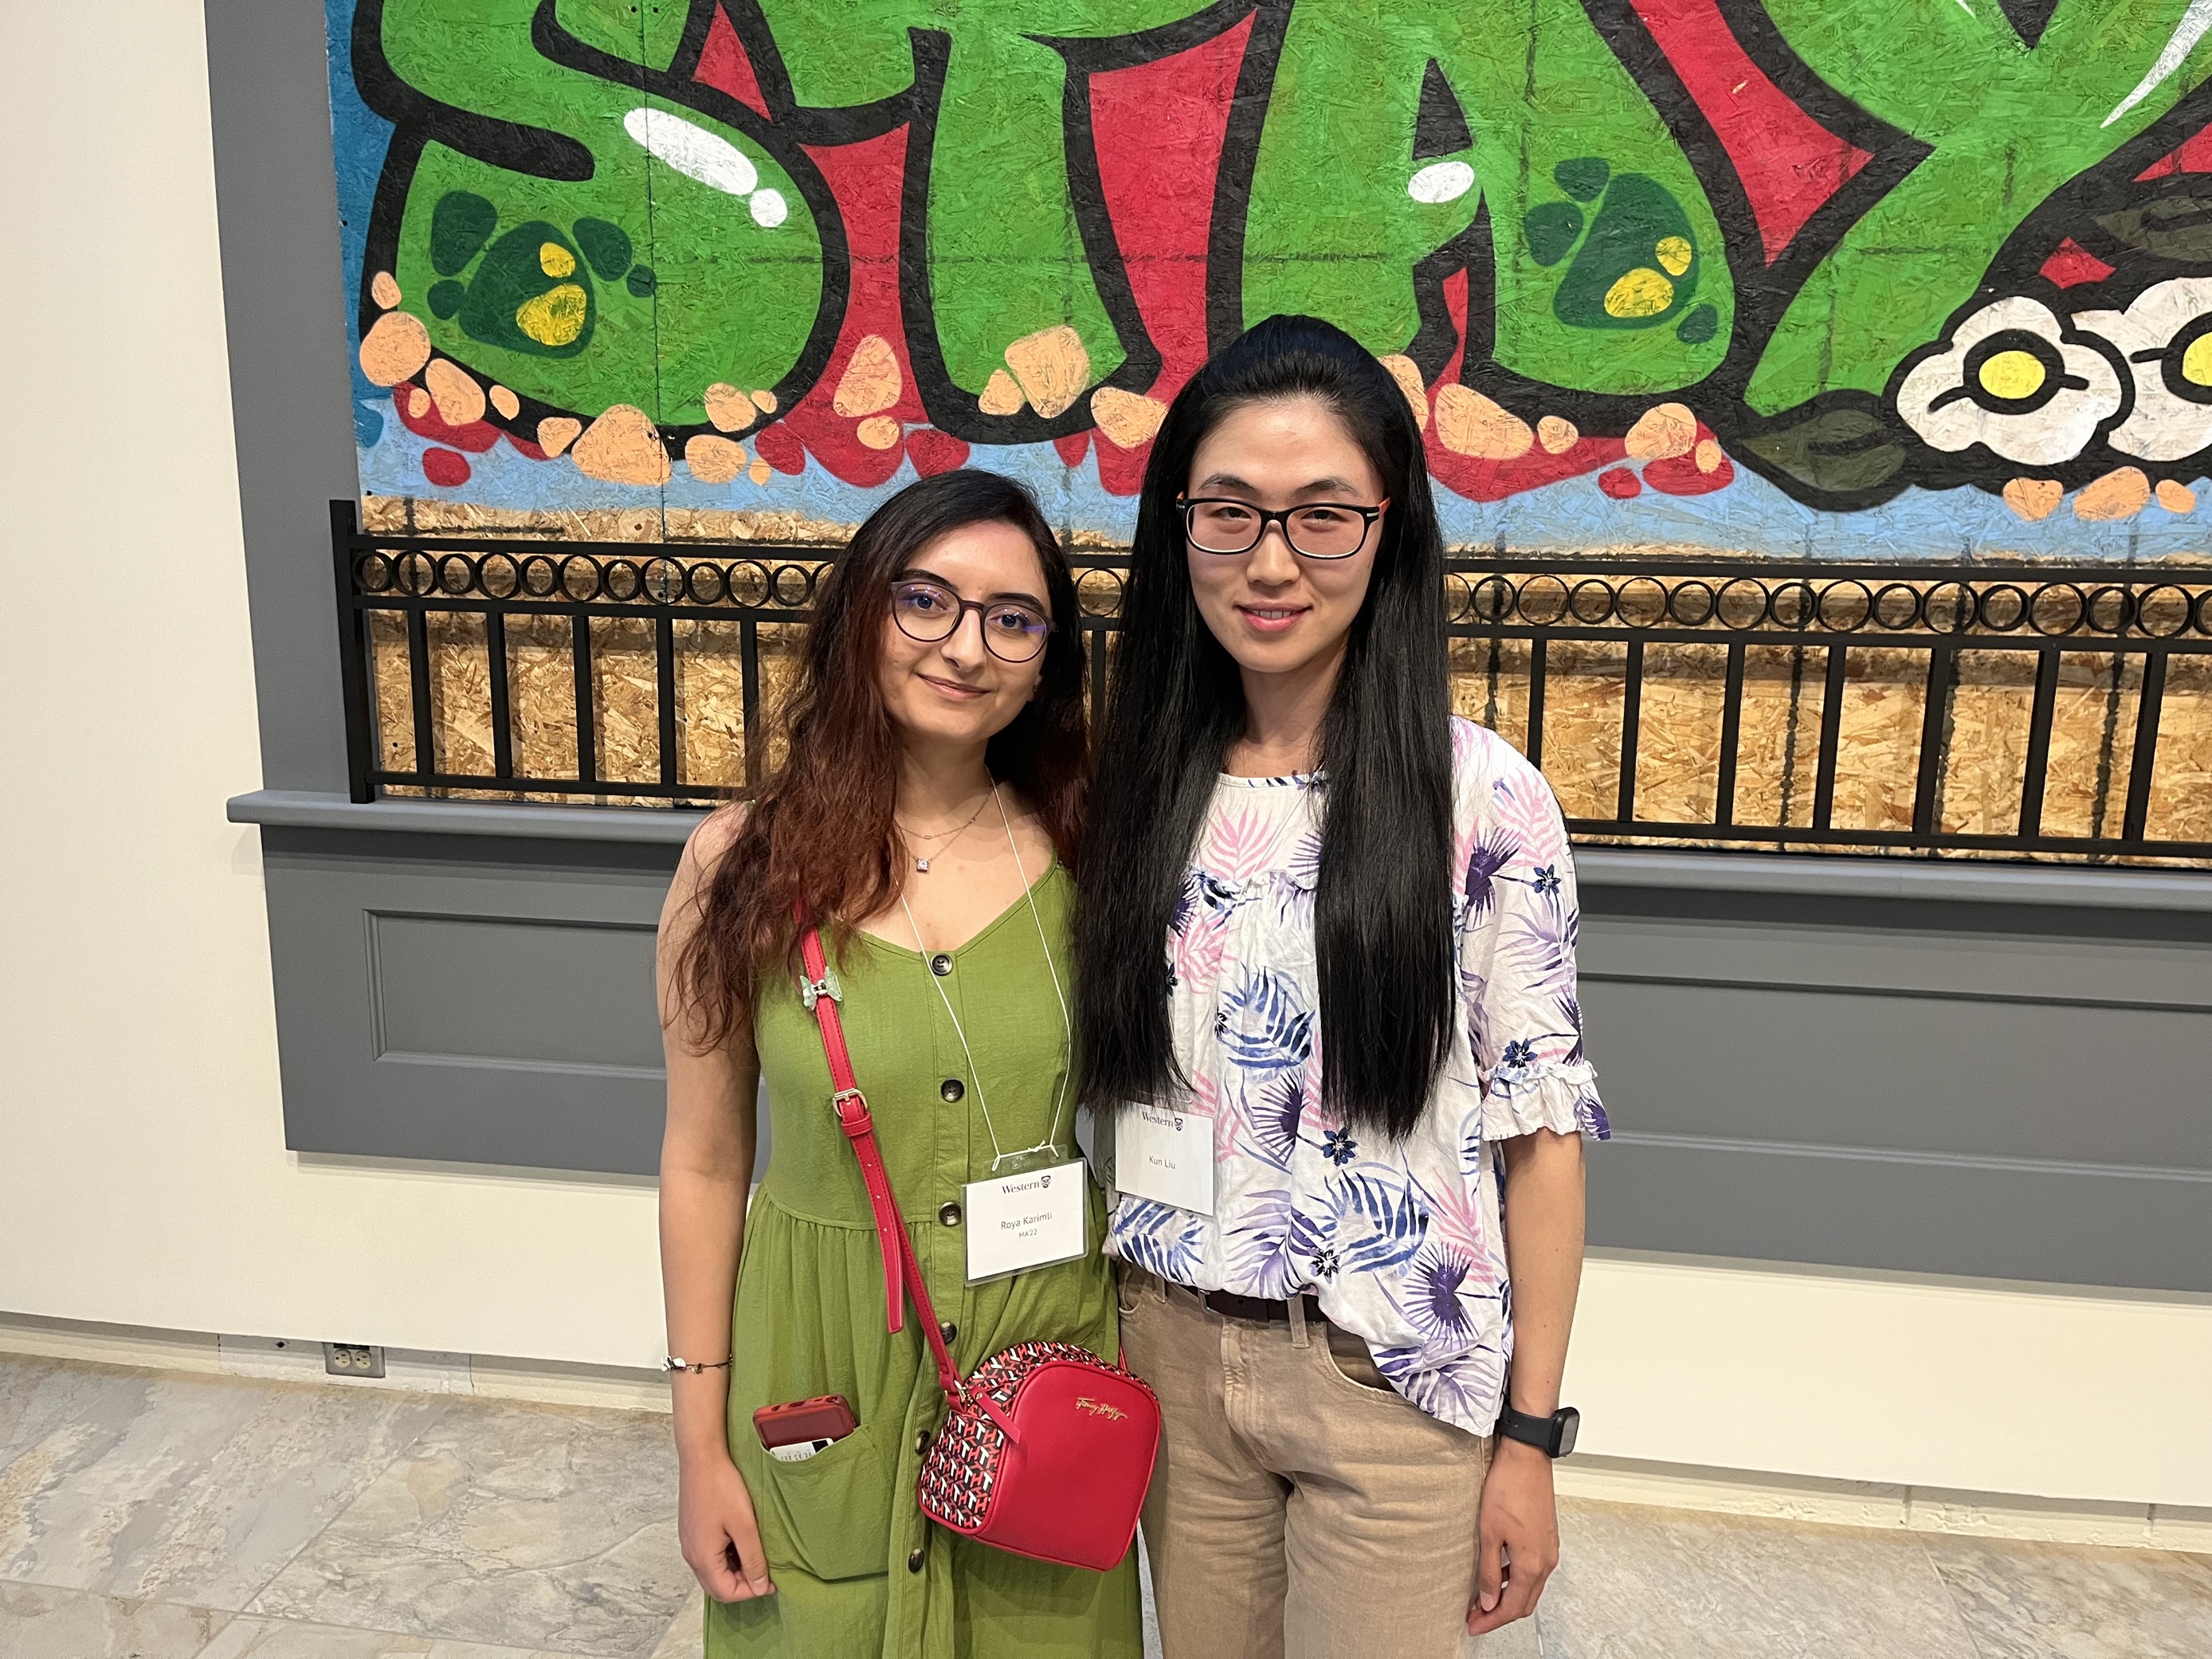 Having previously taught and now considering a return to the classroom, Western Education graduate students Roya Karimli (left) and Kun Liu were keen to attend the Teacher Appreciation Event.